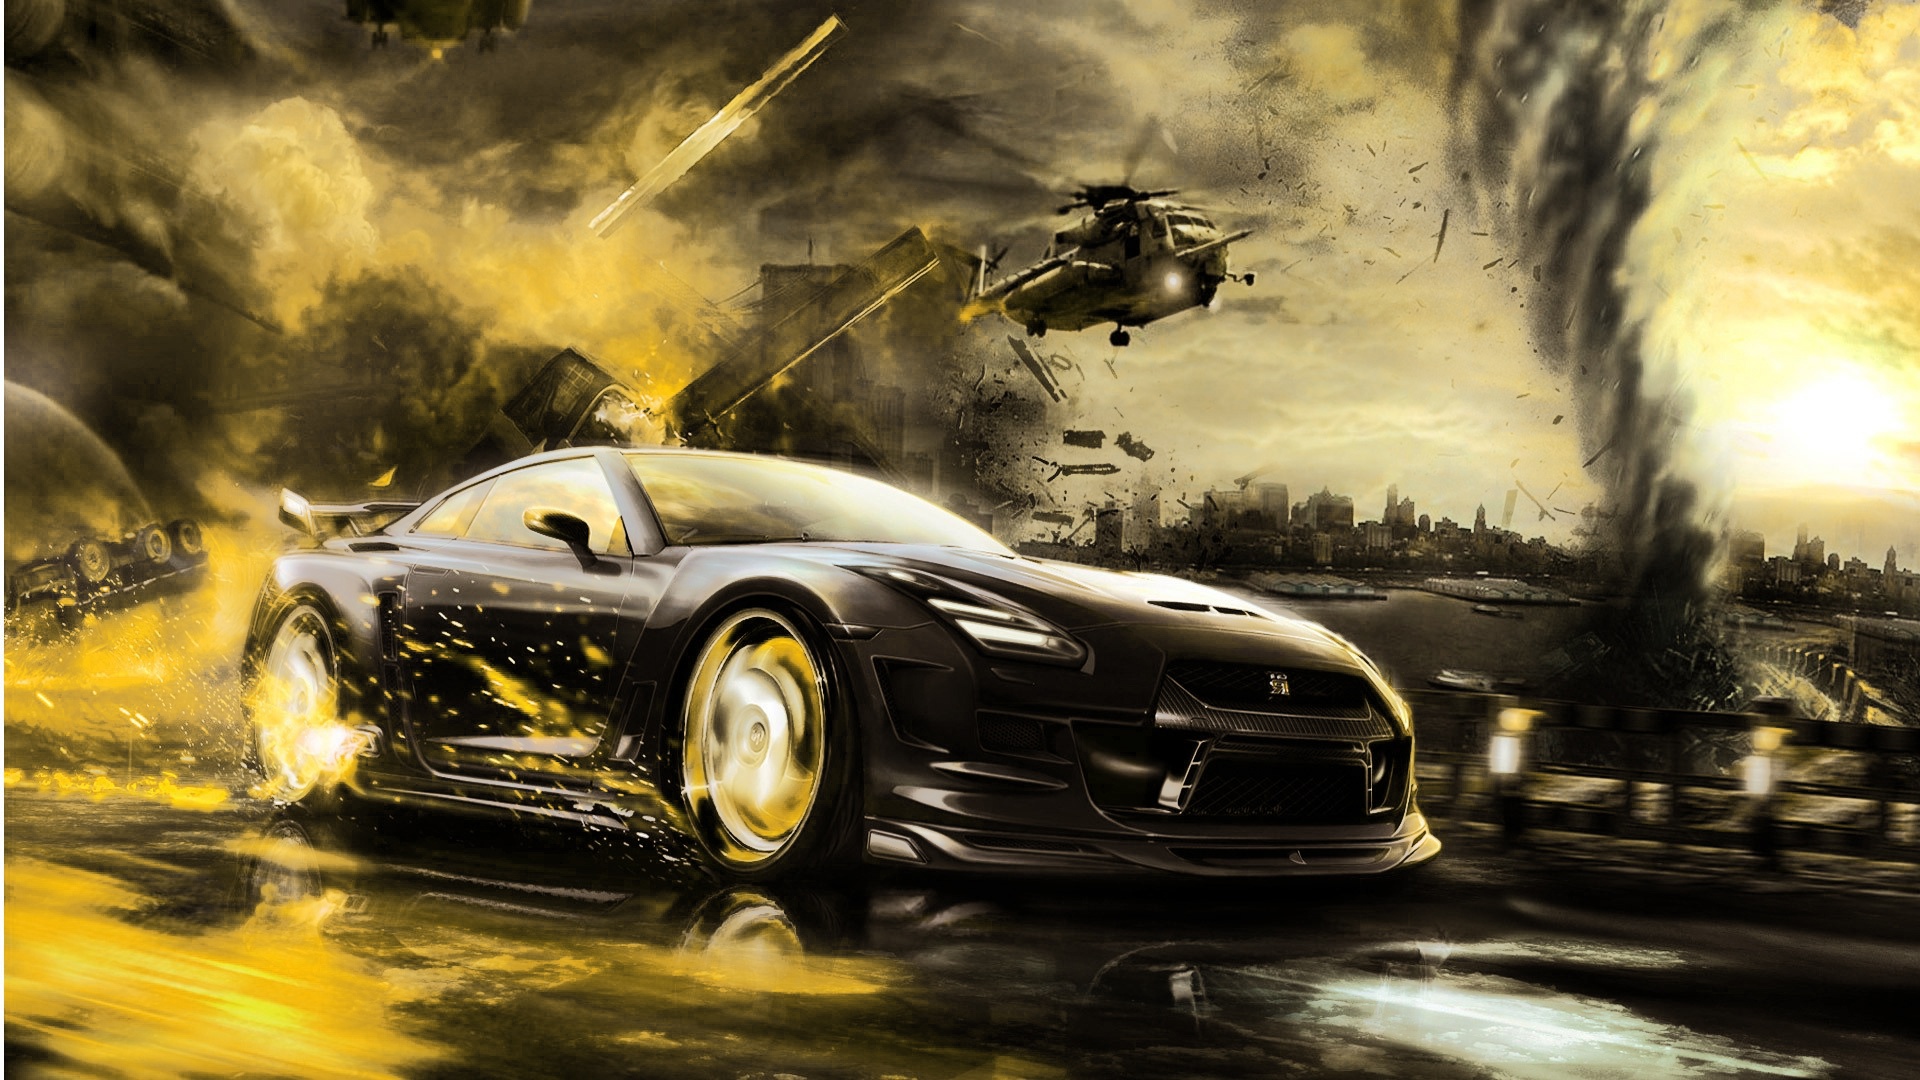 Cool Car Background Wallpapers 1920x1080